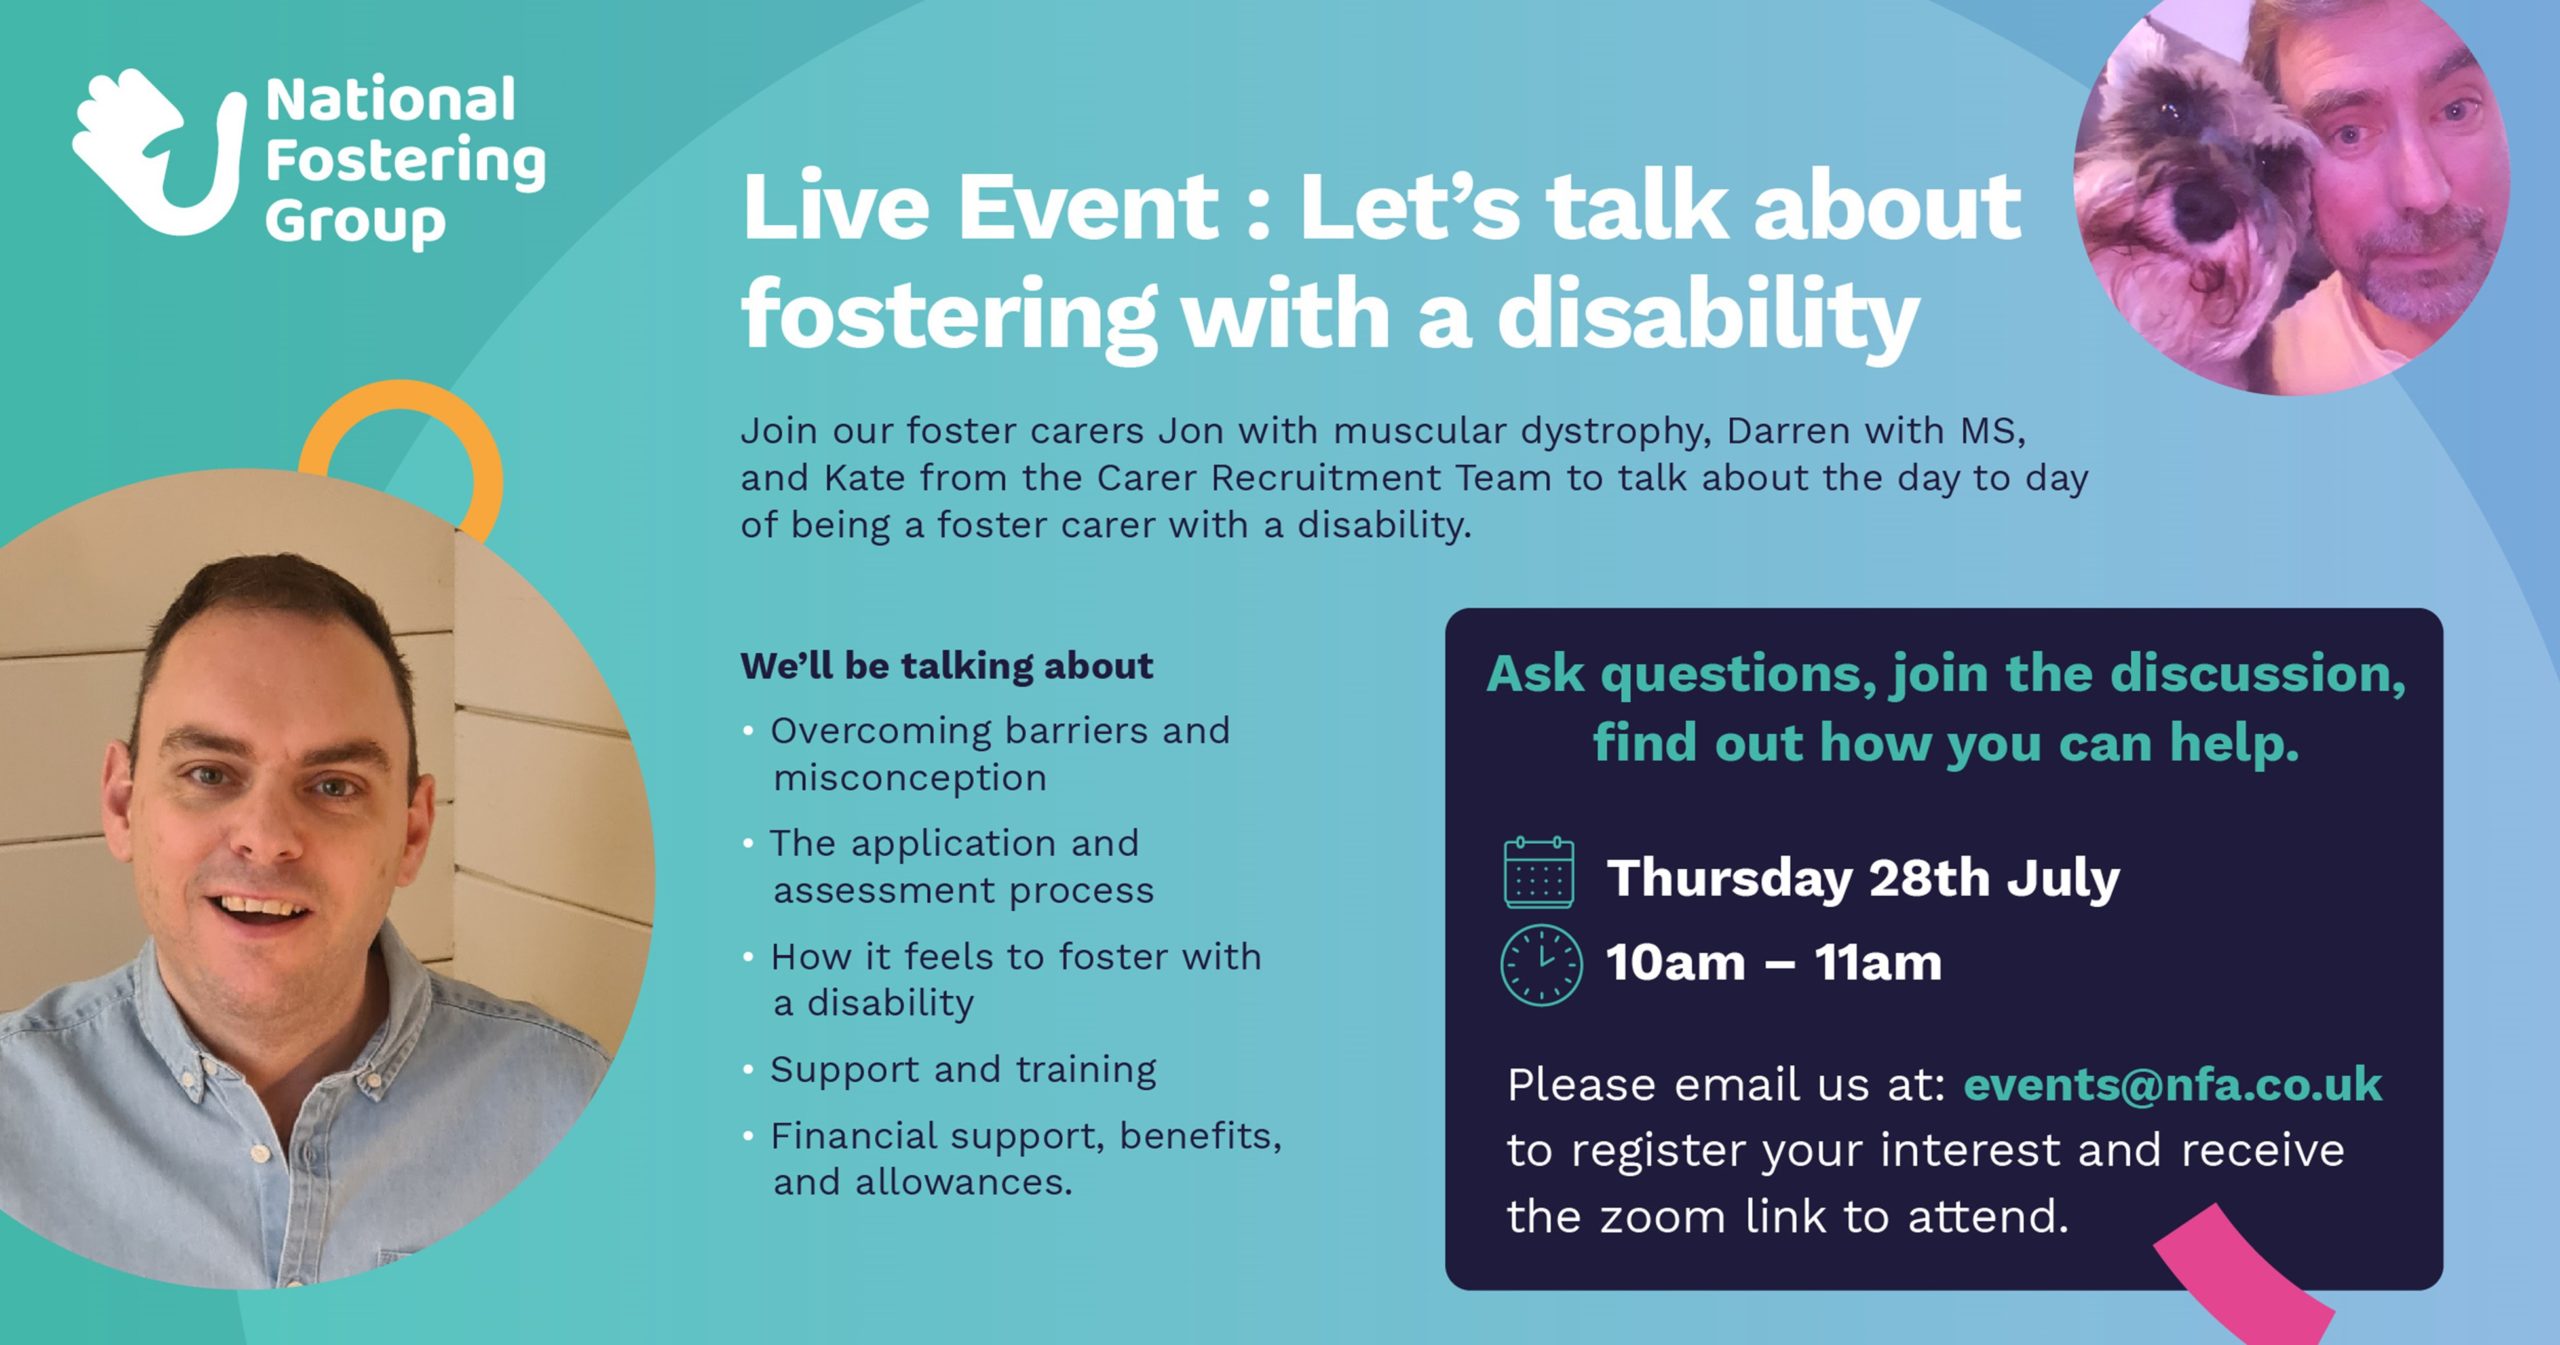 Fostering with a disability event